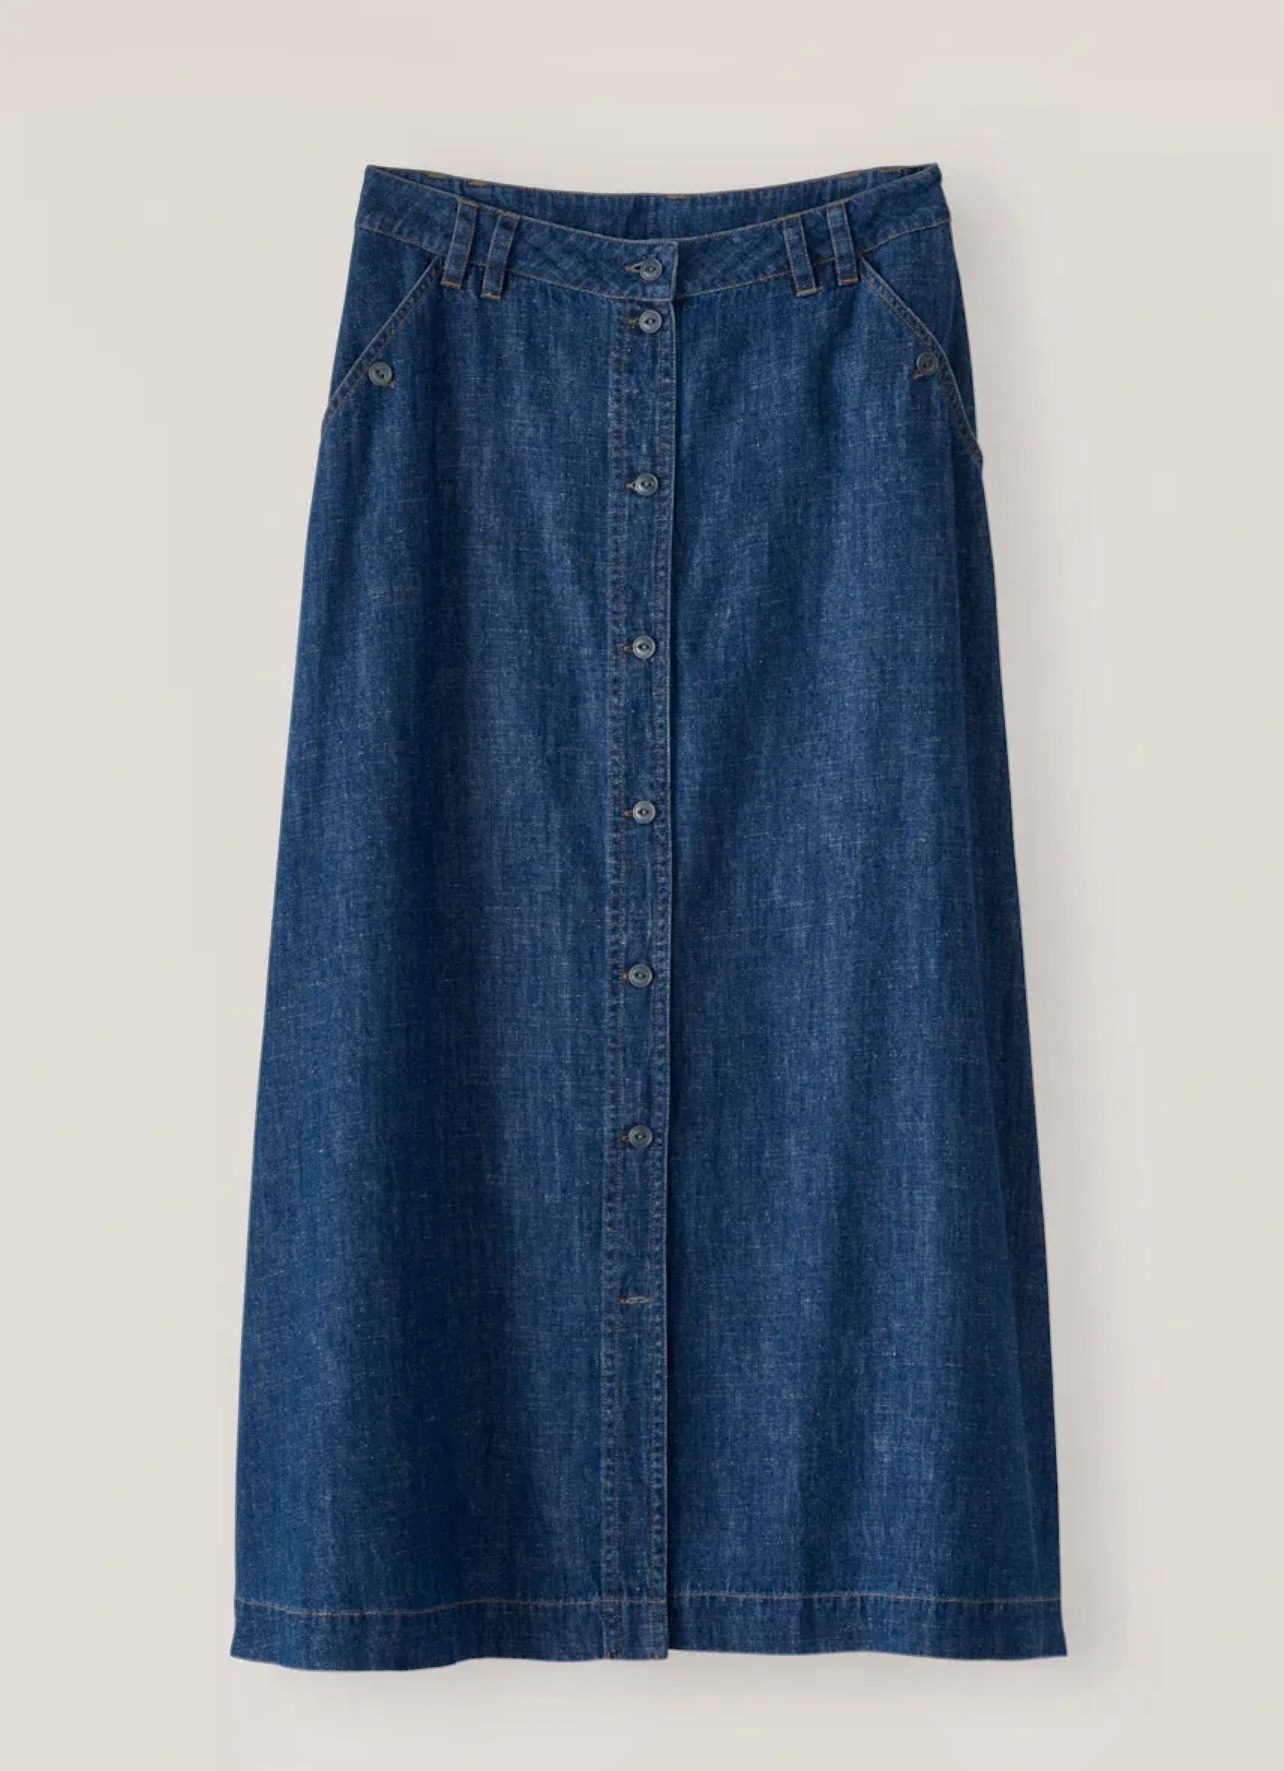 Denim A line skirt with button front closure.